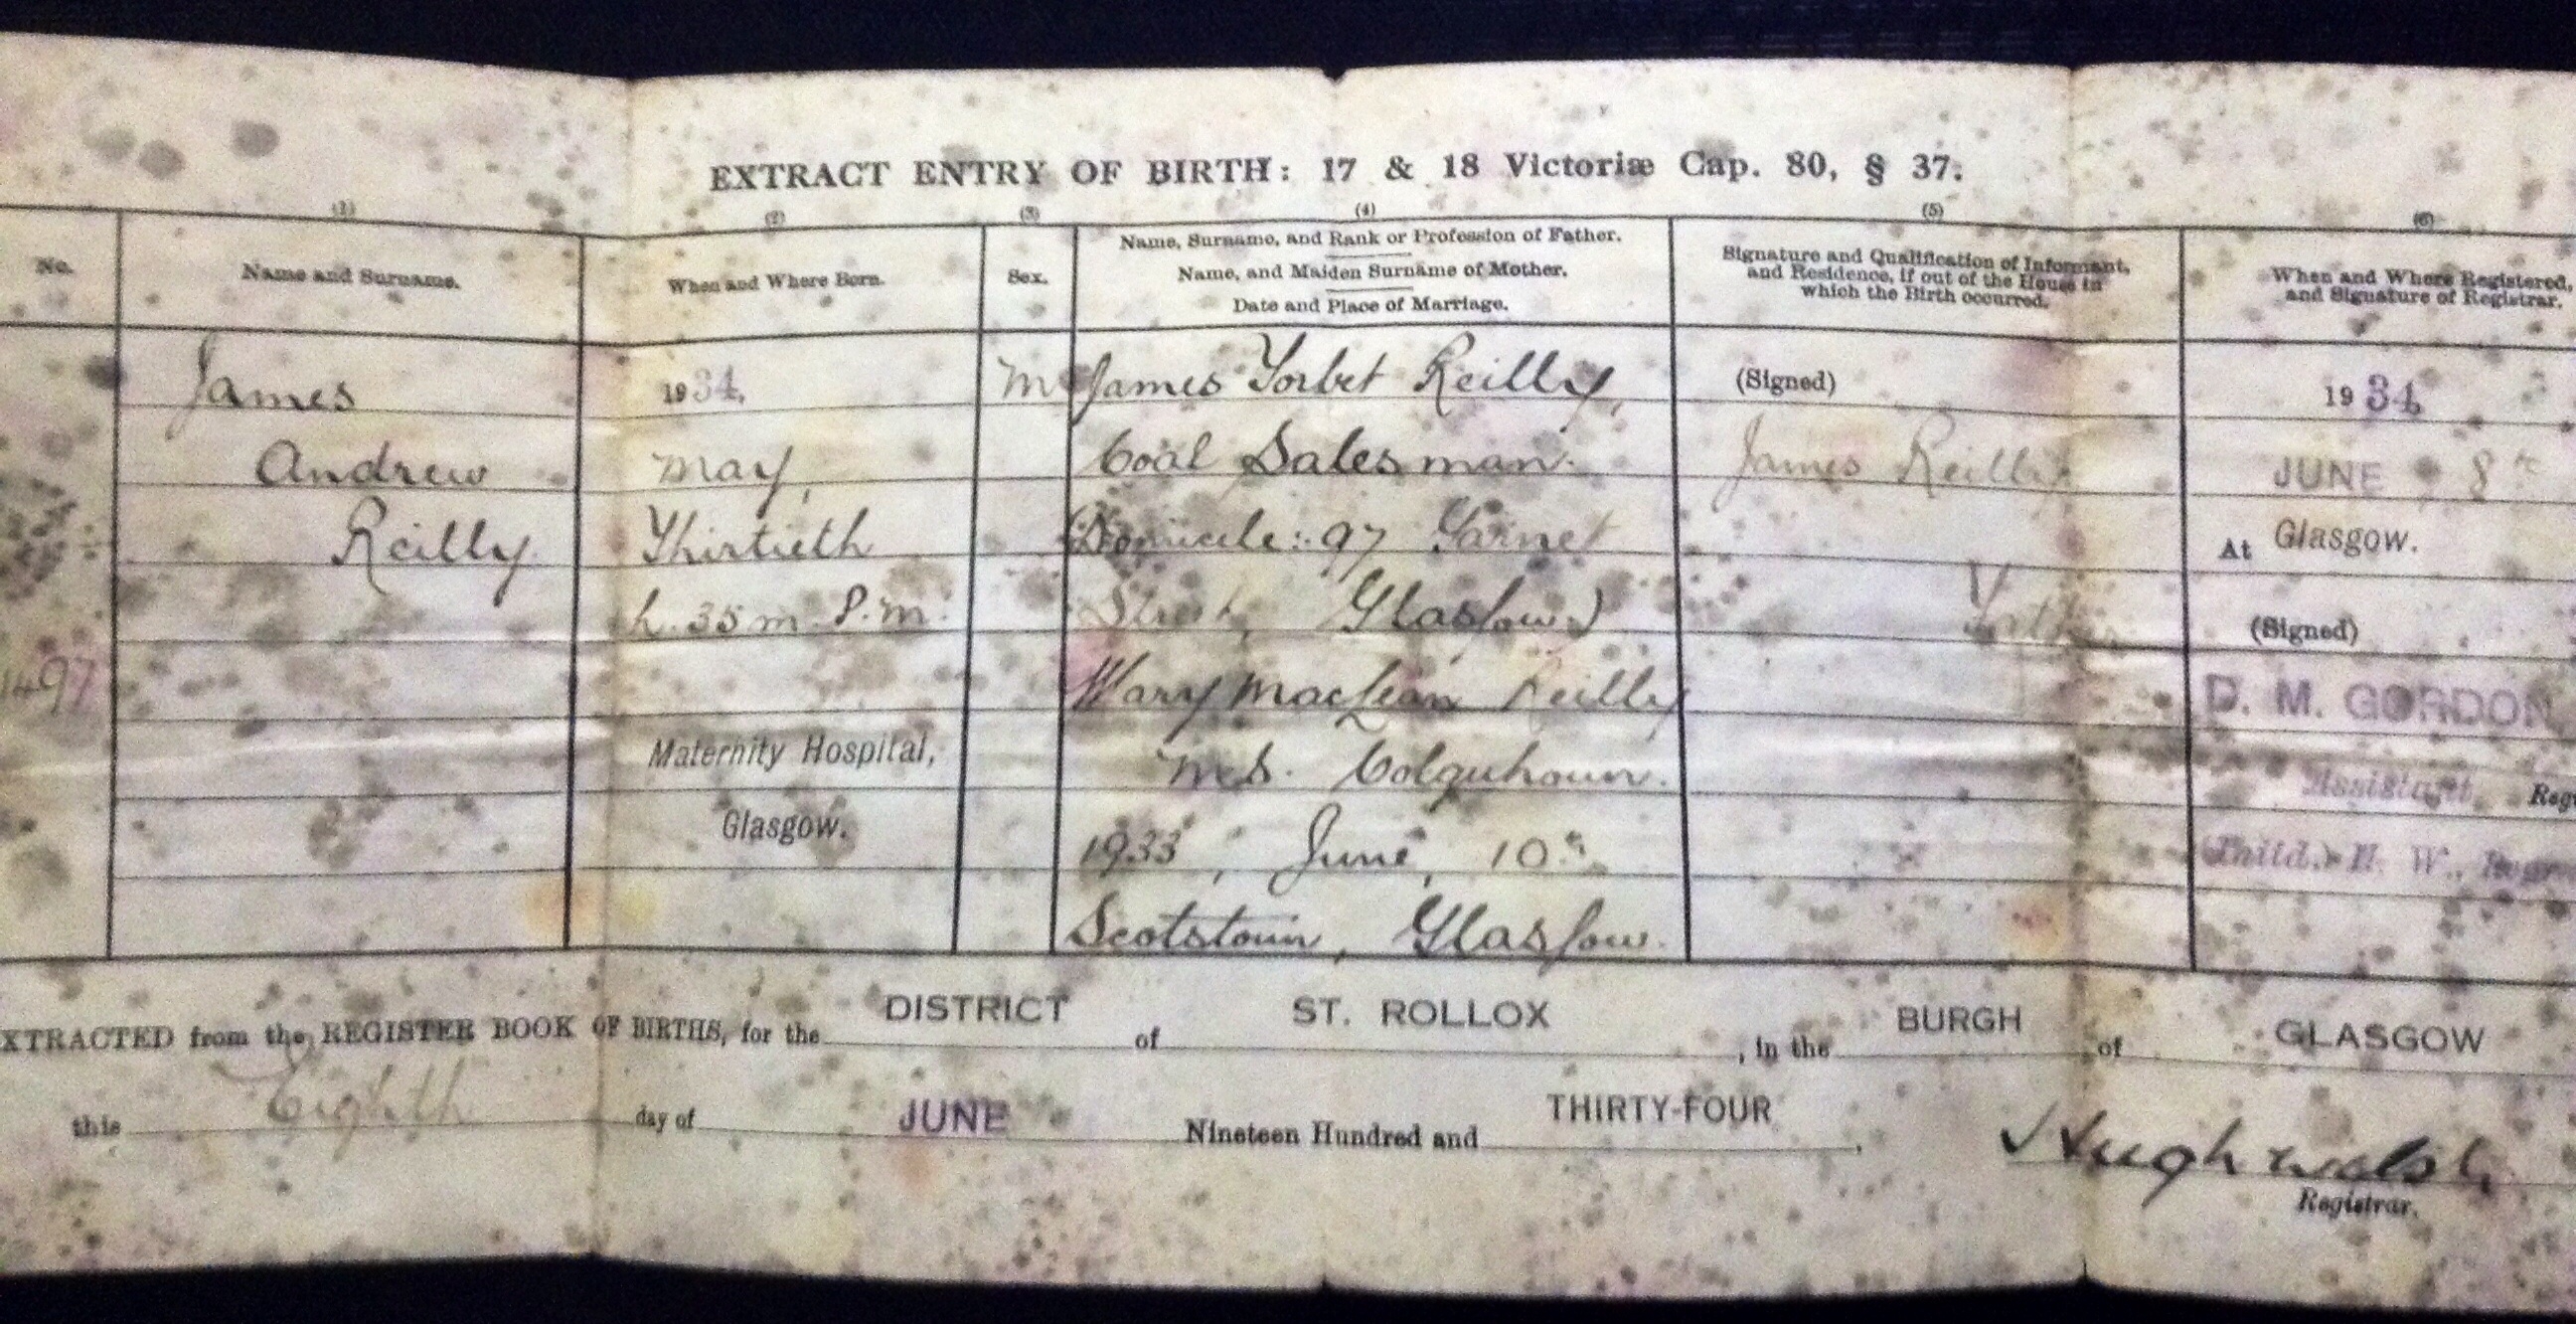 James Andrew Reilly birth record